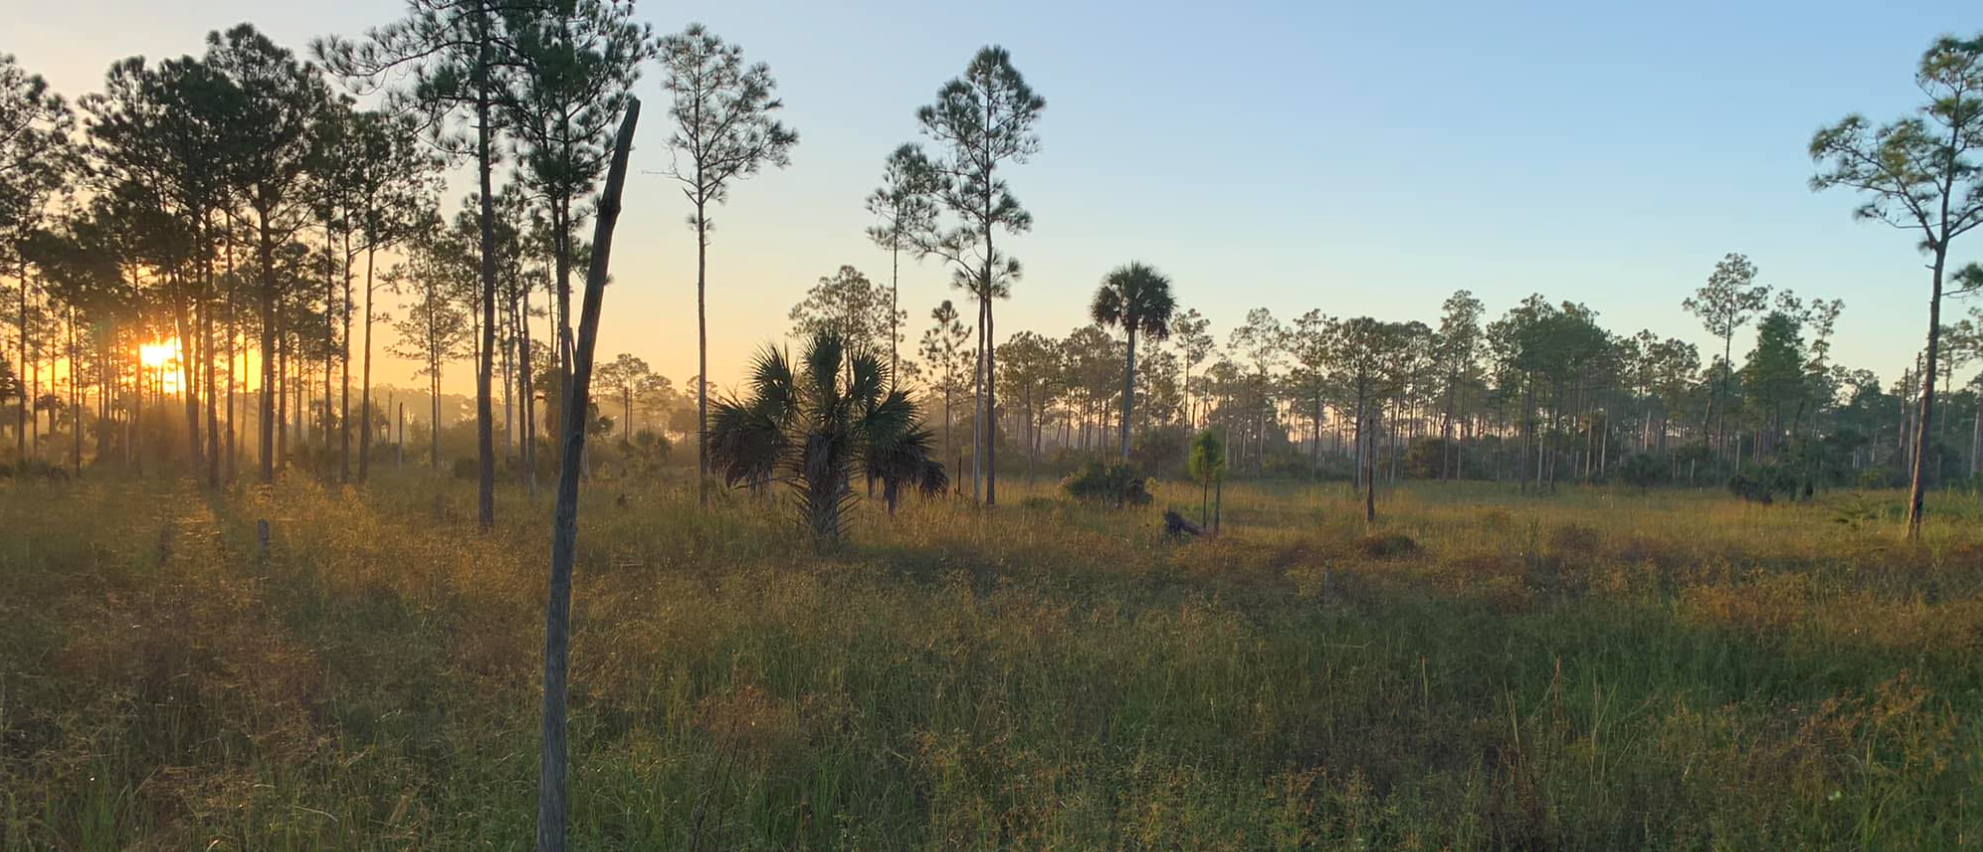 Wetlands at Corkscrew Swamp Sanctuary, with the sun either rising or setting through the trees on the left side of the photo.